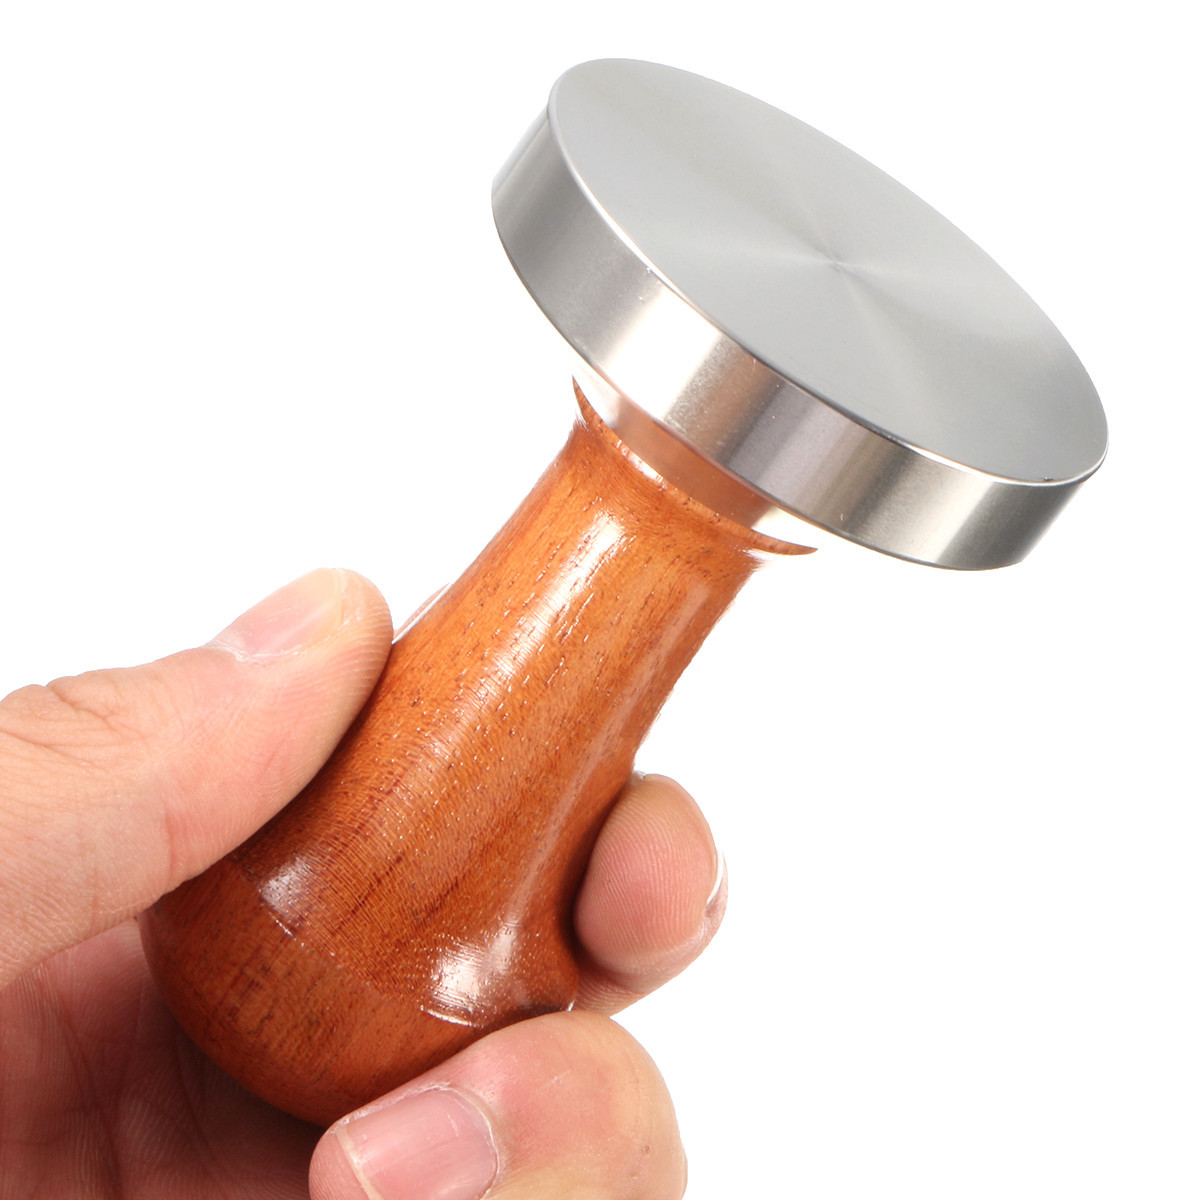 53mm-Stainless-Steel-Cafe-Coffee-Tamper-Bean-Press-for-Espresso-Flat-Base-Wooden-Handle-1170307-4